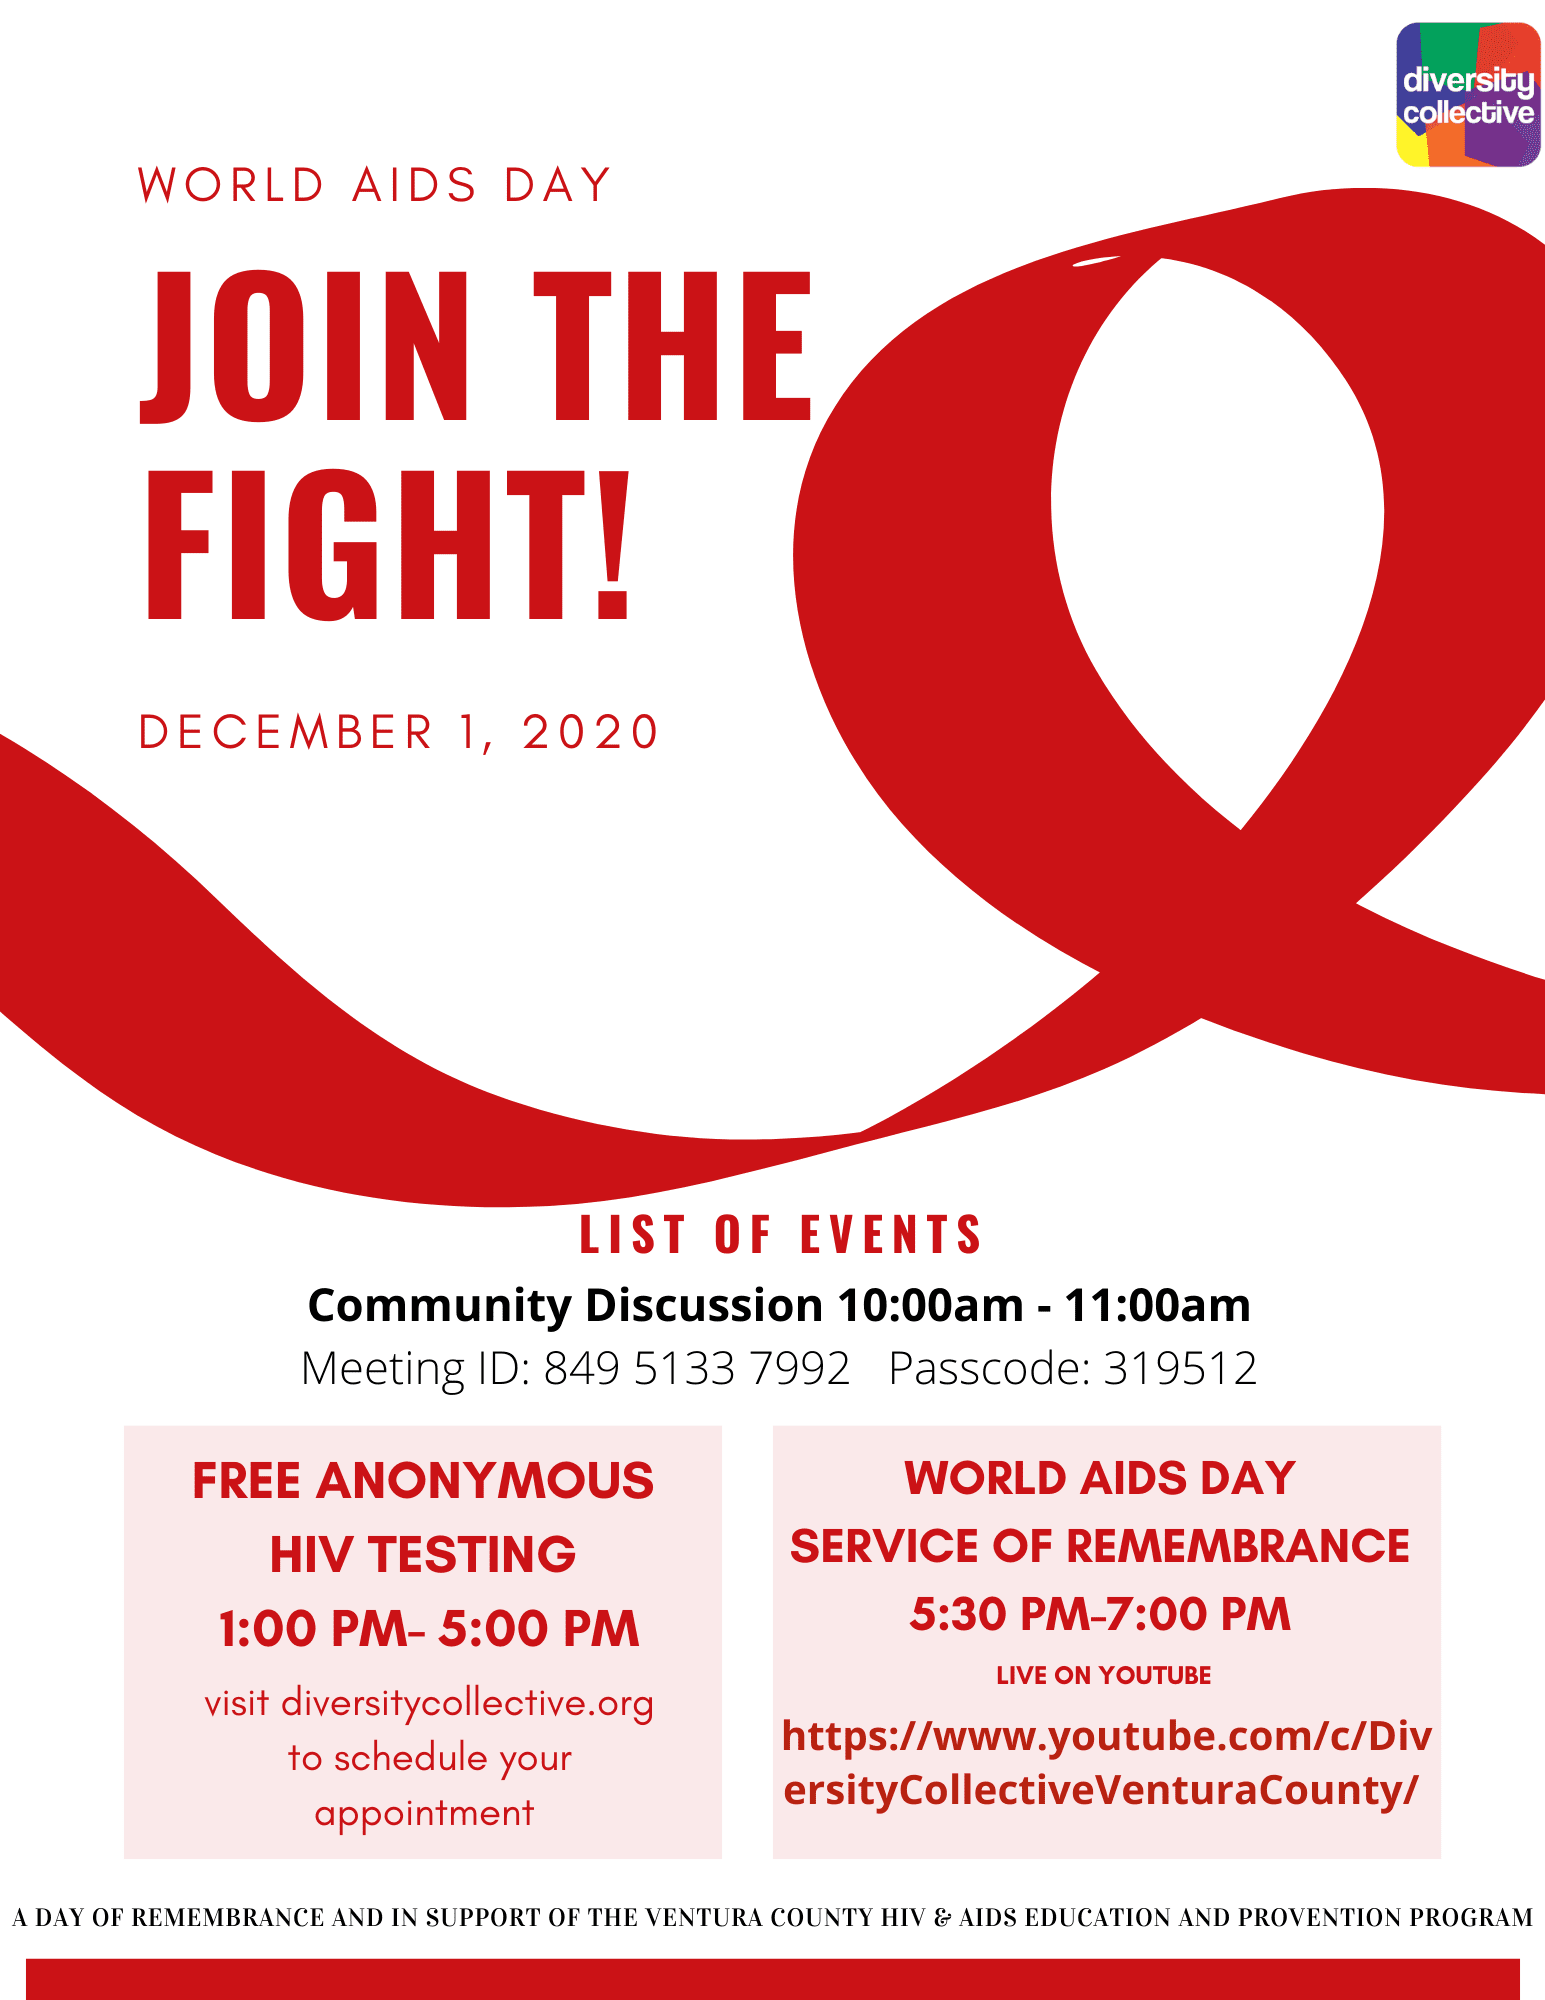 Red poster for world aids day on december 1, 2020, promoting awareness, offering free hiv testing, and providing details for a discussion event.